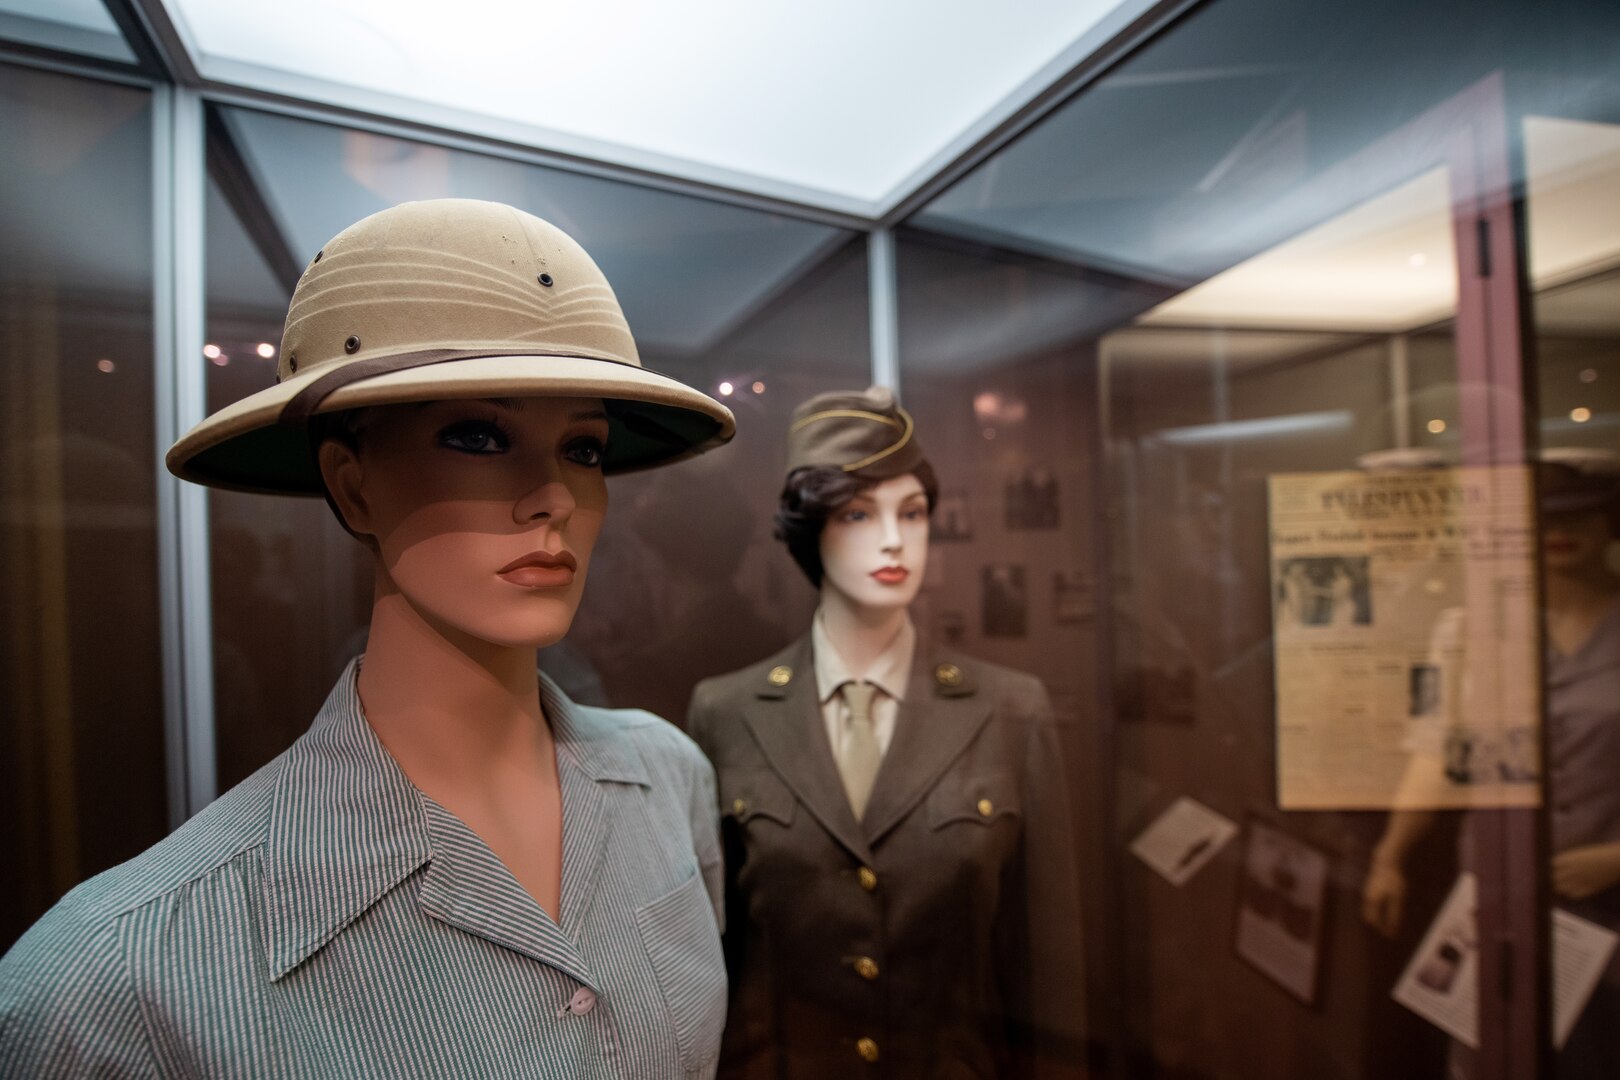 Artifacts from the Women in the Air Force gallery are displayed in the USAF Airman Heritage Training Complex, Aug. 10, 2020 at Joint Base San Antonio-Lackland, Texas. The Airman Heritage Museum collects, researches, preserves, interprets and presents the USAF Enlisted Corps history, heritage, and traditions to develop Airmen today and for tomorrow.  (U.S. Air Force photo by Sarayuth Pinthong)